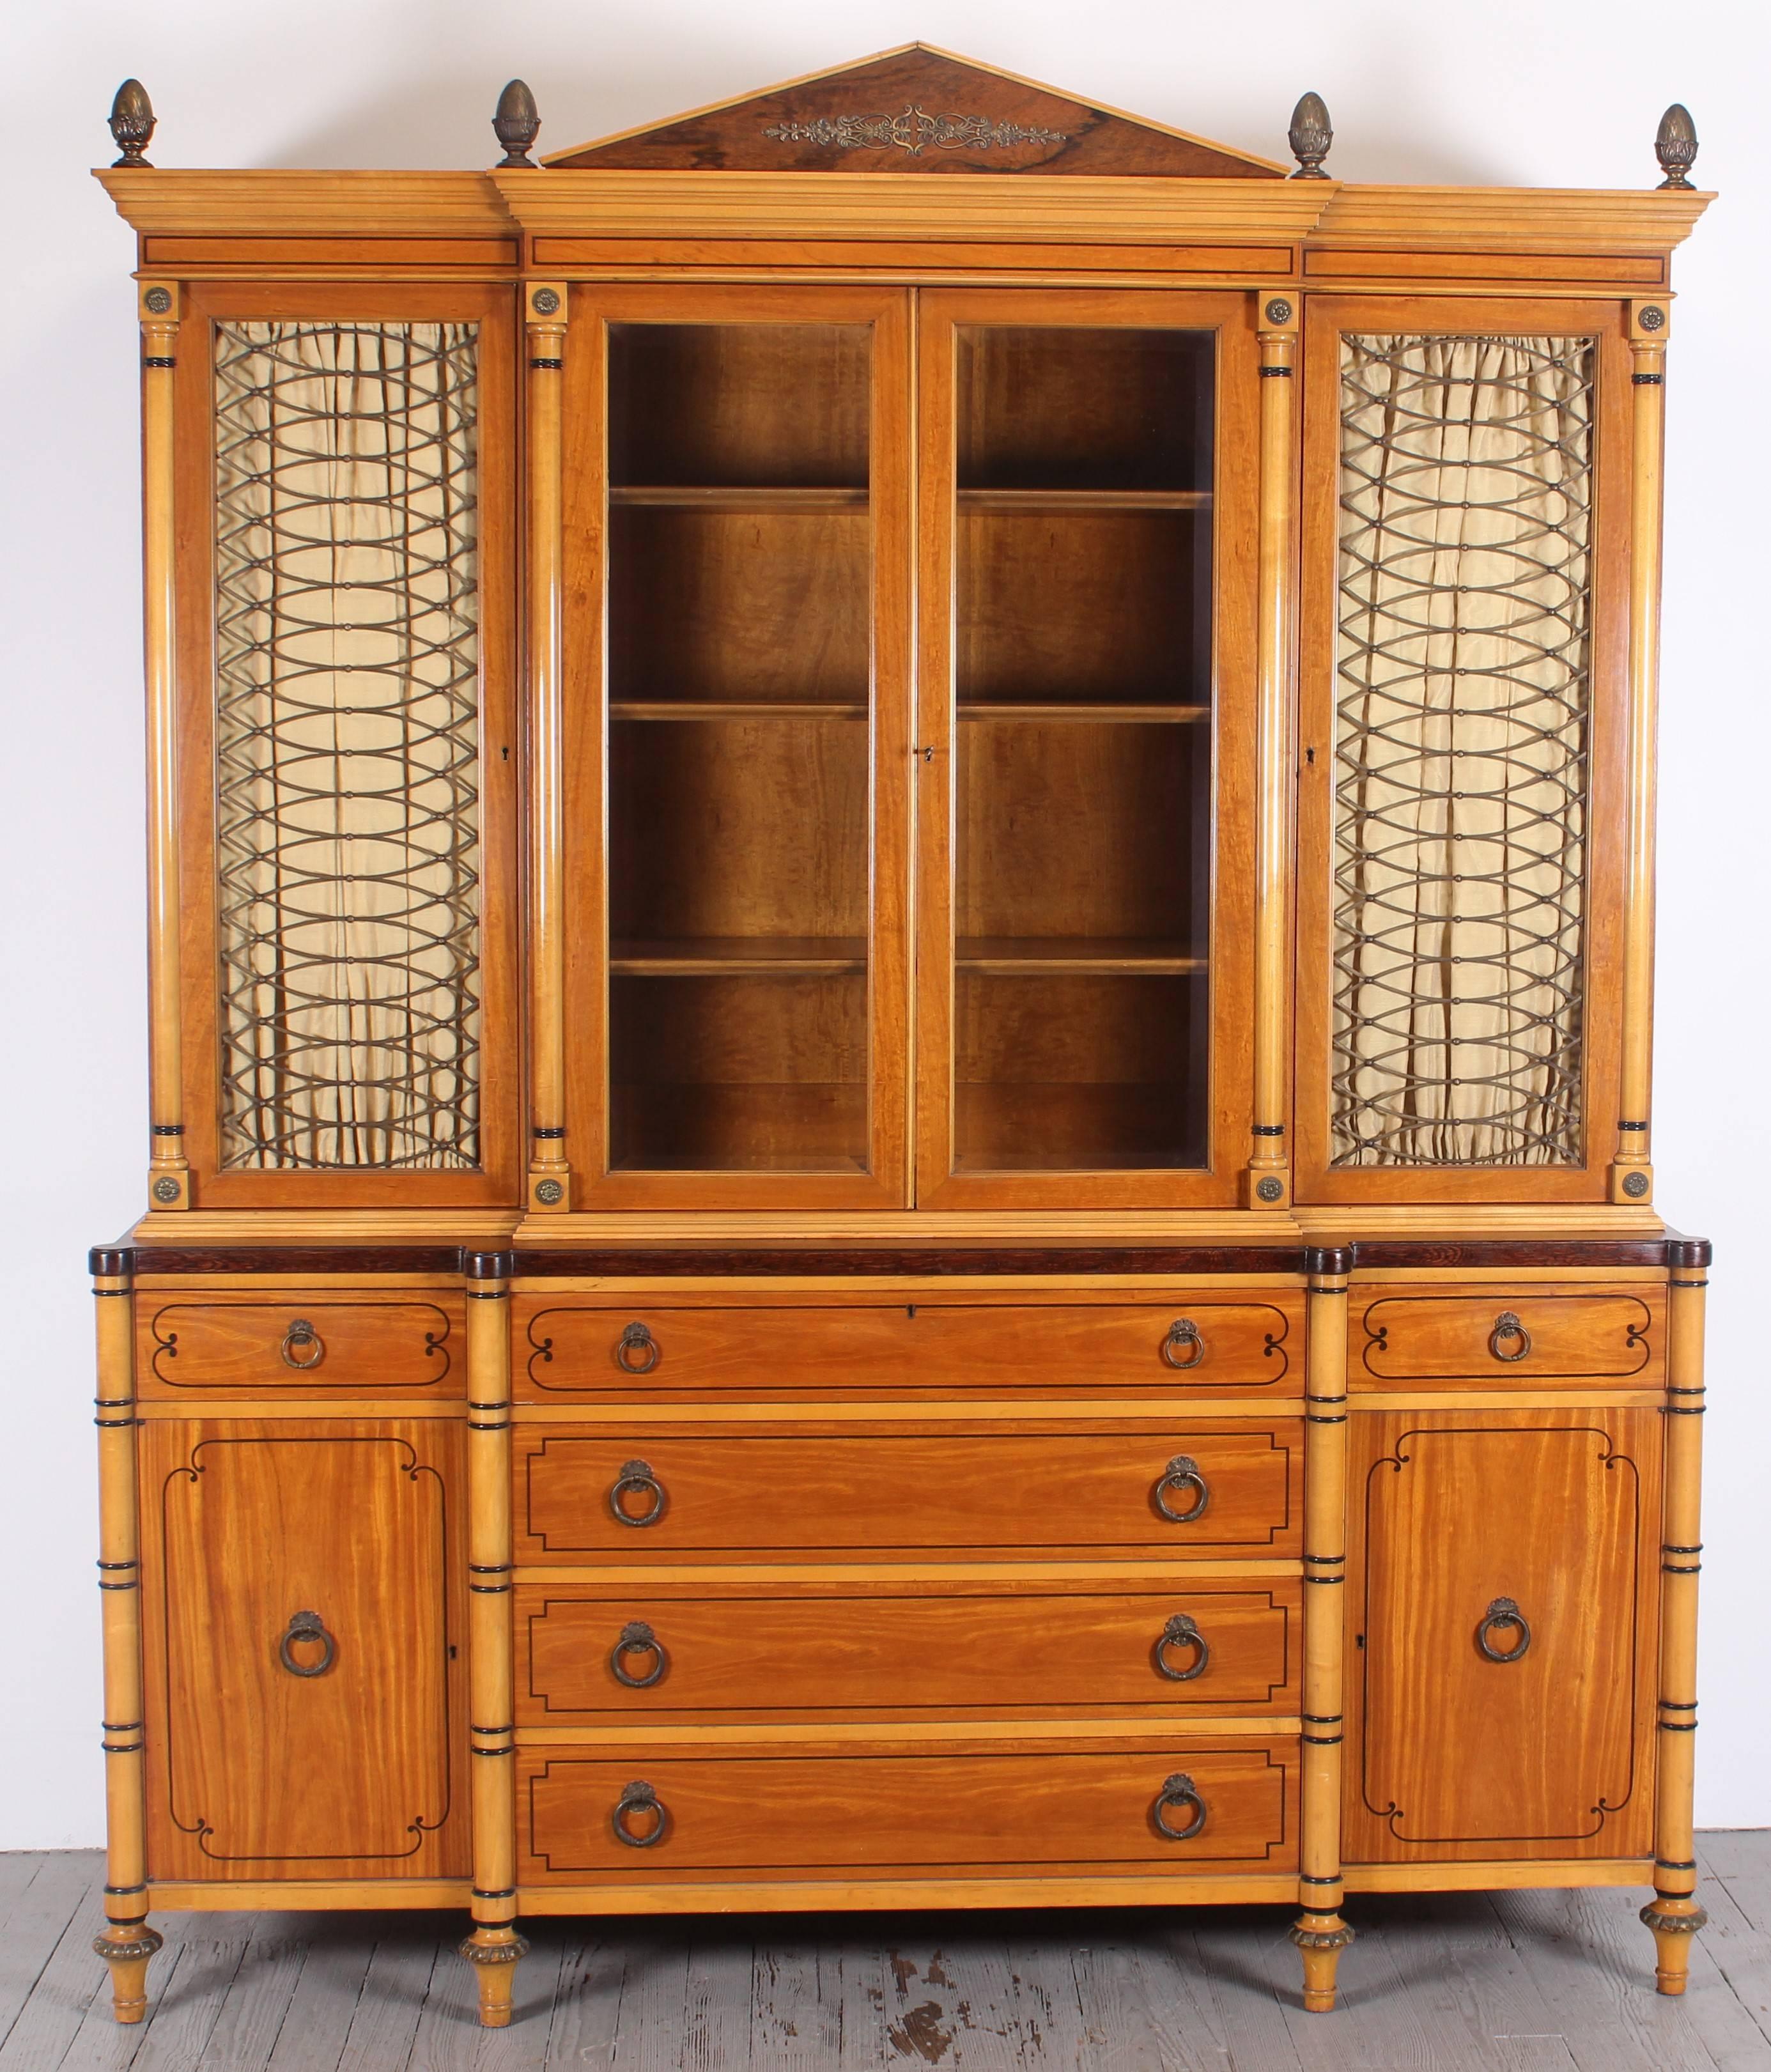 Kittinger two-piece neoclassical cabinet, beveled glass center doors, solid brass artichokes, other solid brass details. Satinwood, rosewood, ebonized inlay door and drawer inlays, ebonized paint details, shows Biedermeier influences One of the most